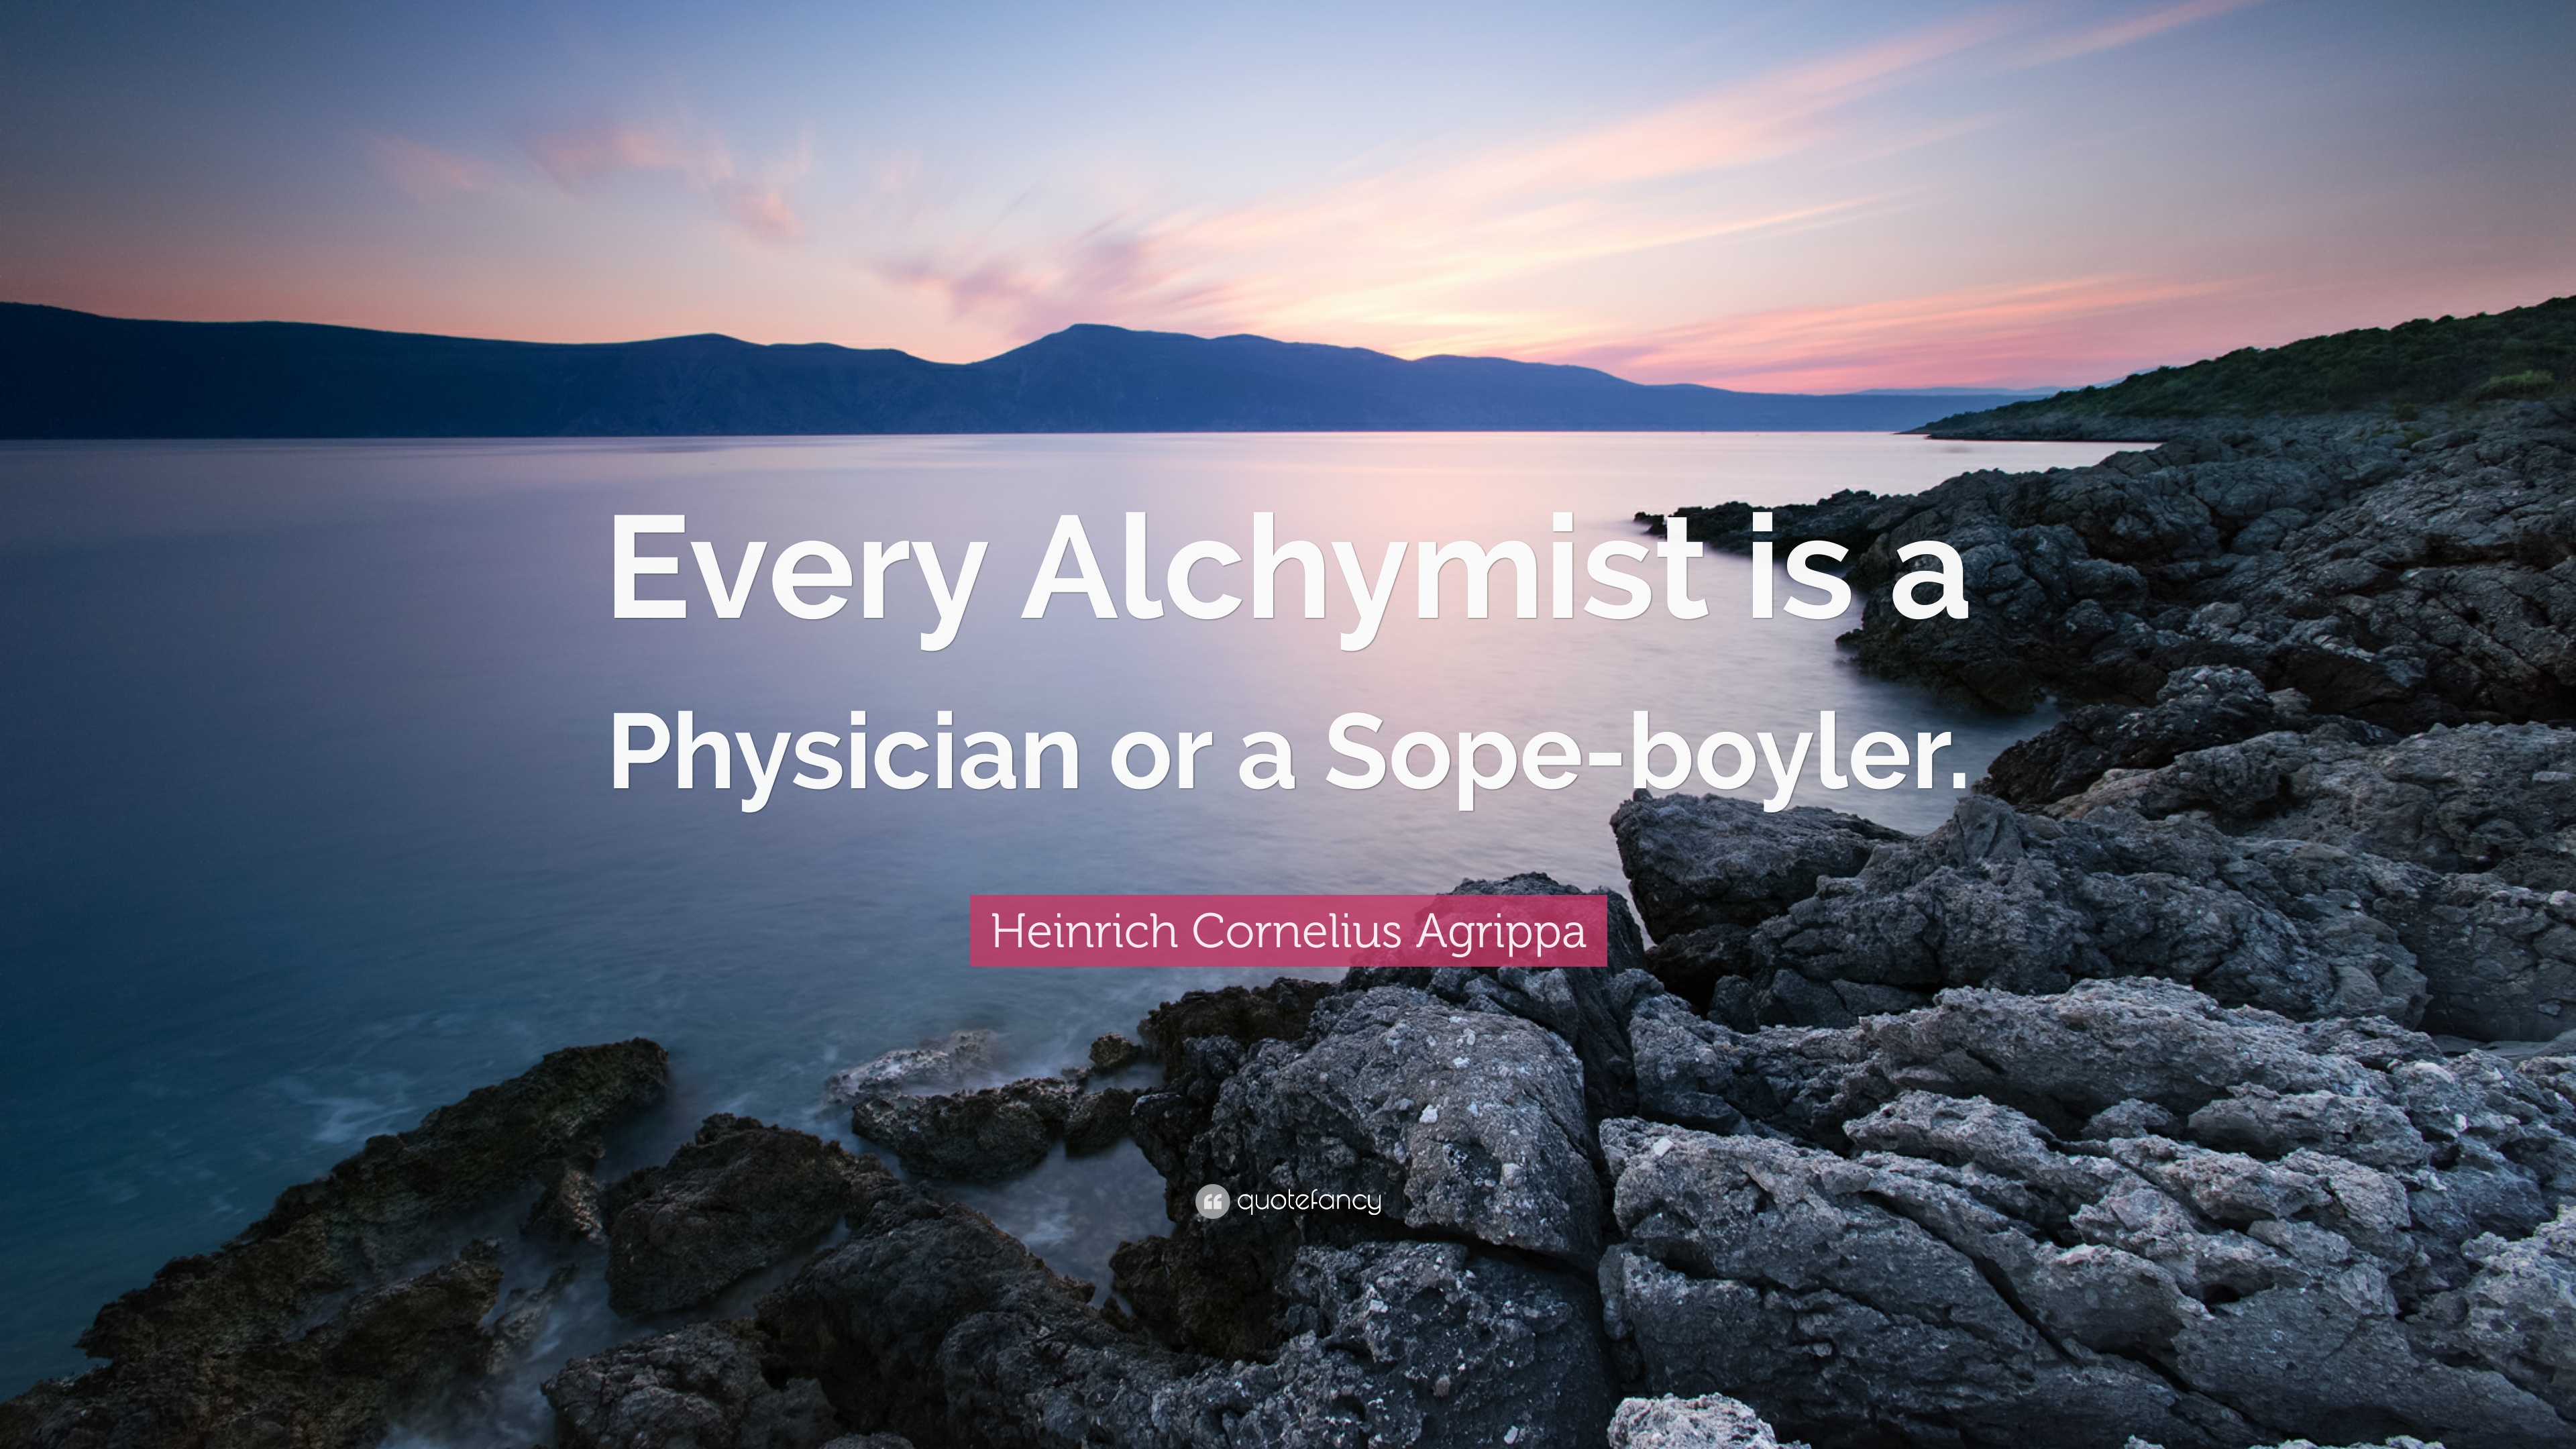 Heinrich Cornelius Agrippa Quote: “Every Alchymist is a Physician or